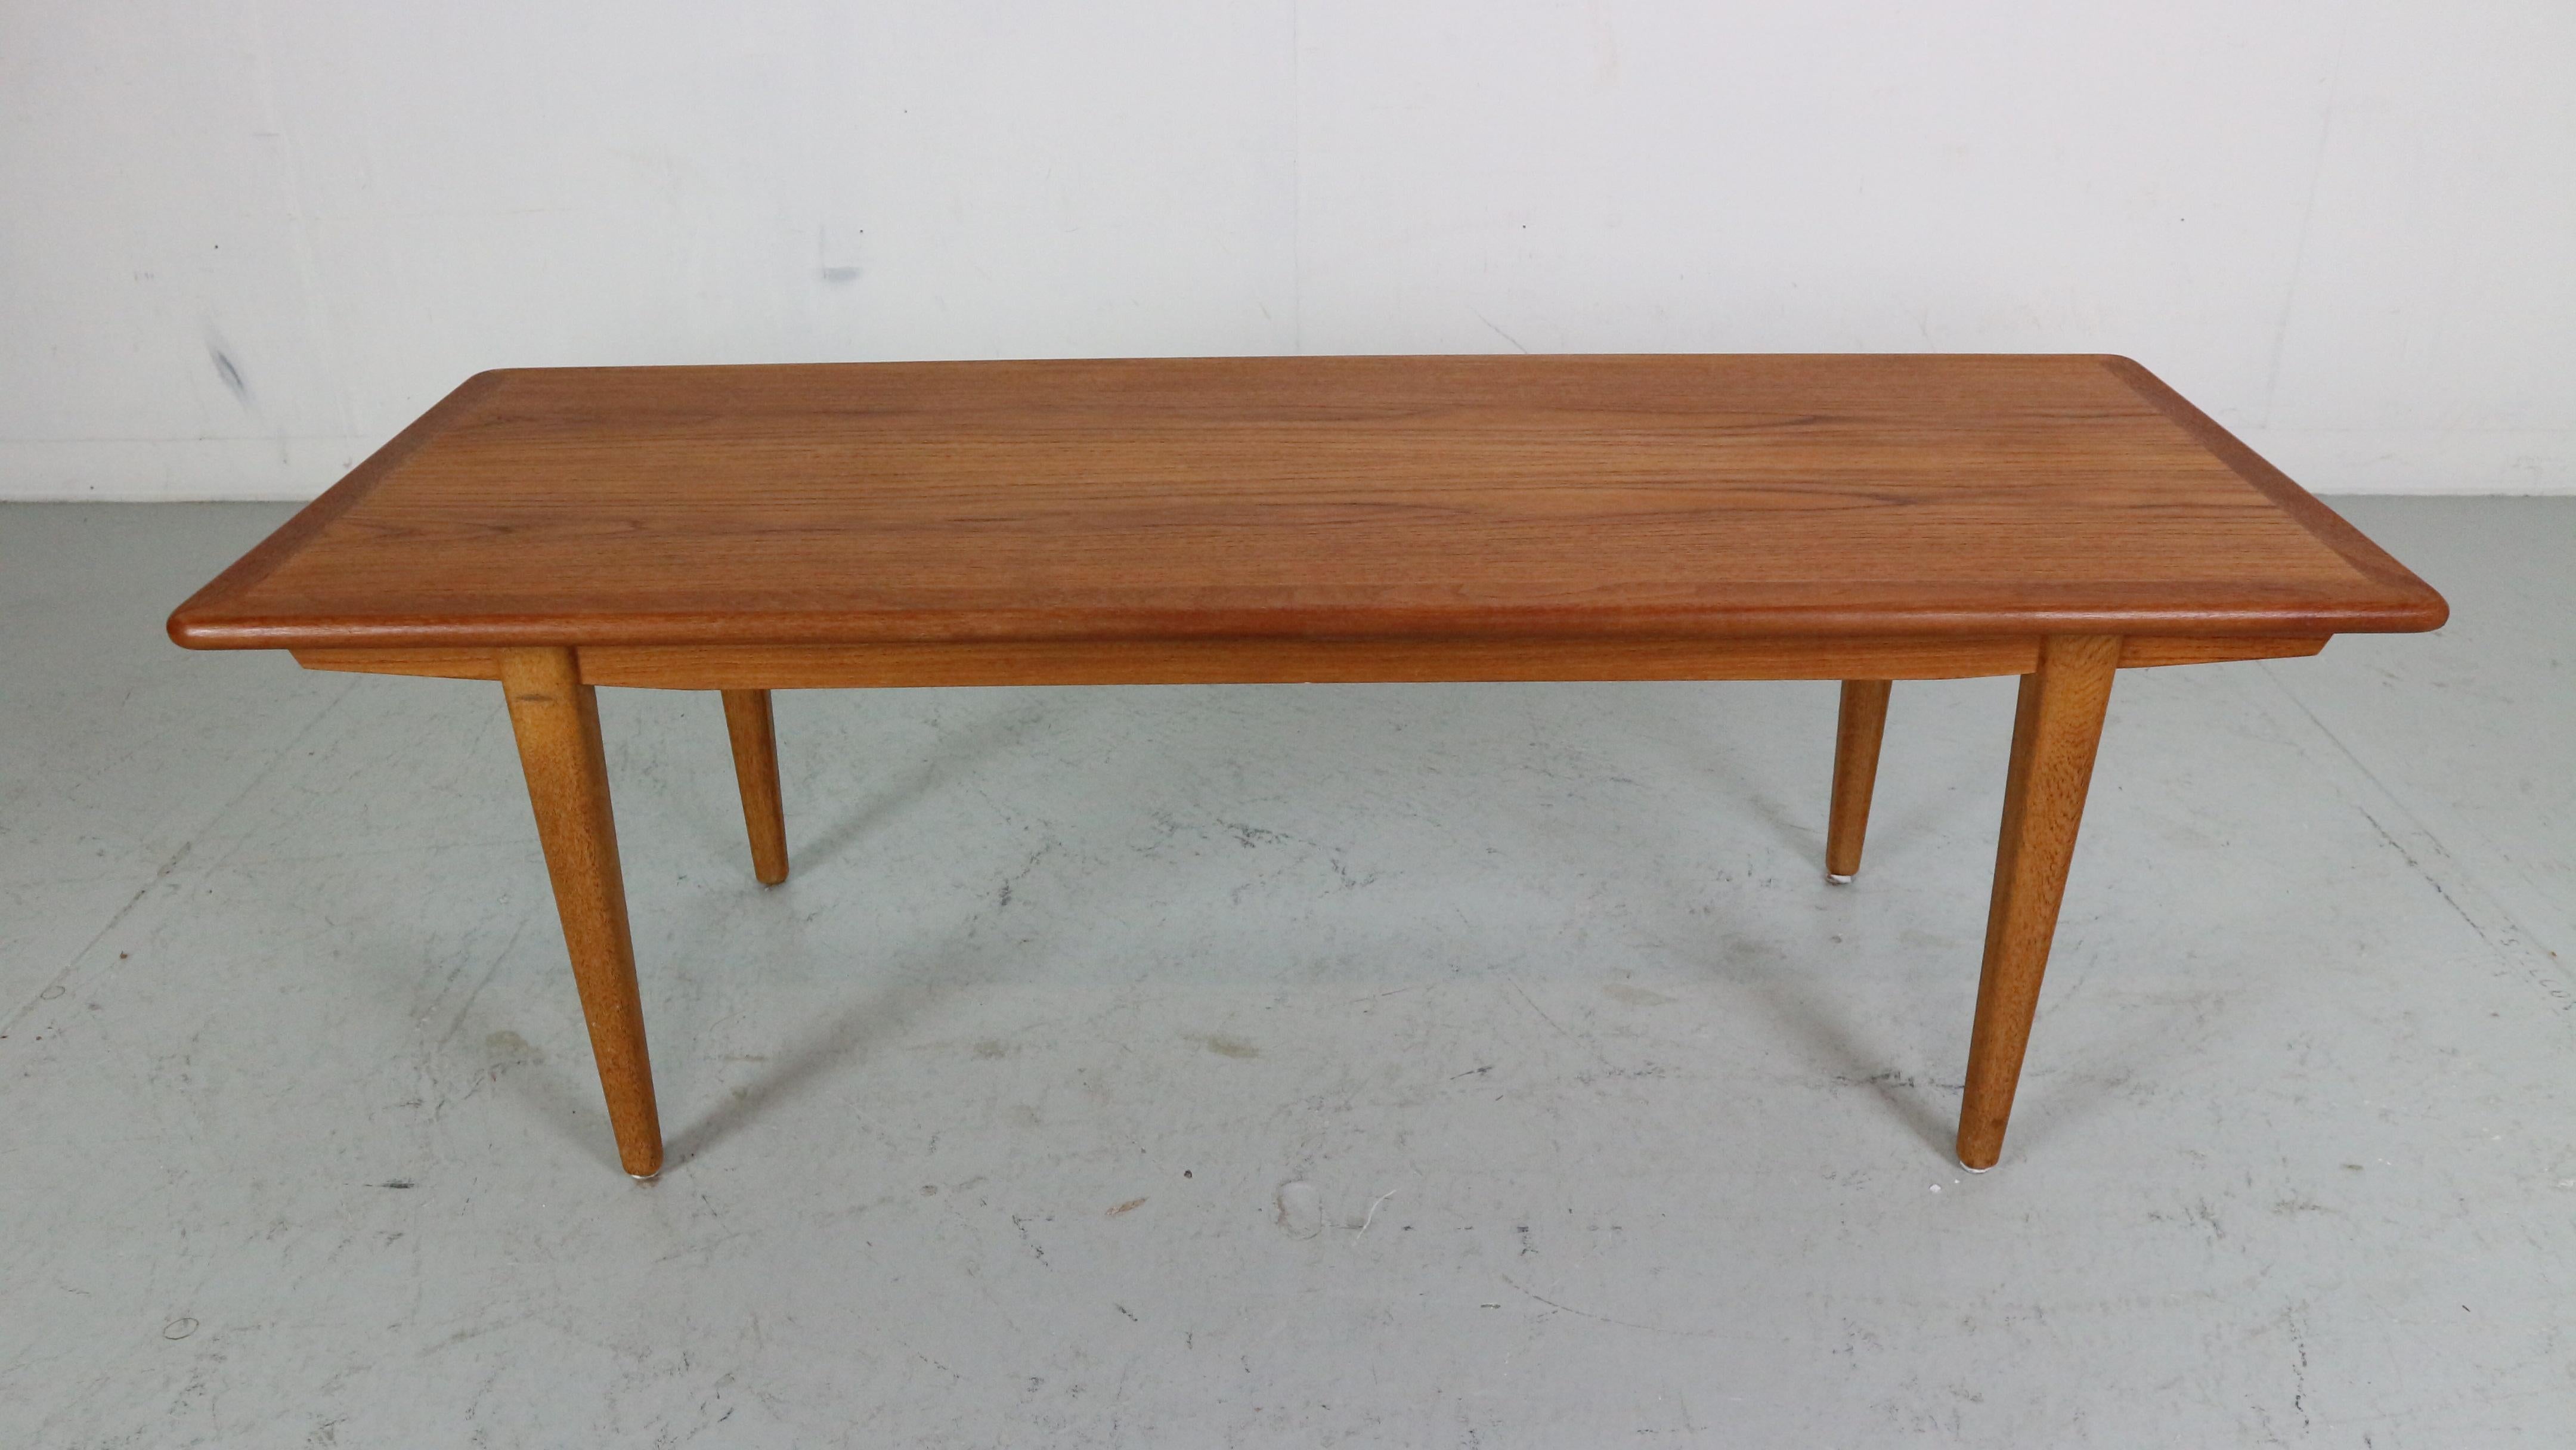 Mid- century modern period teak coffee table made in 1960's period, Denmark.

This minimalistic coffee table is made of solid teak wood and is in a great vintage condition.

